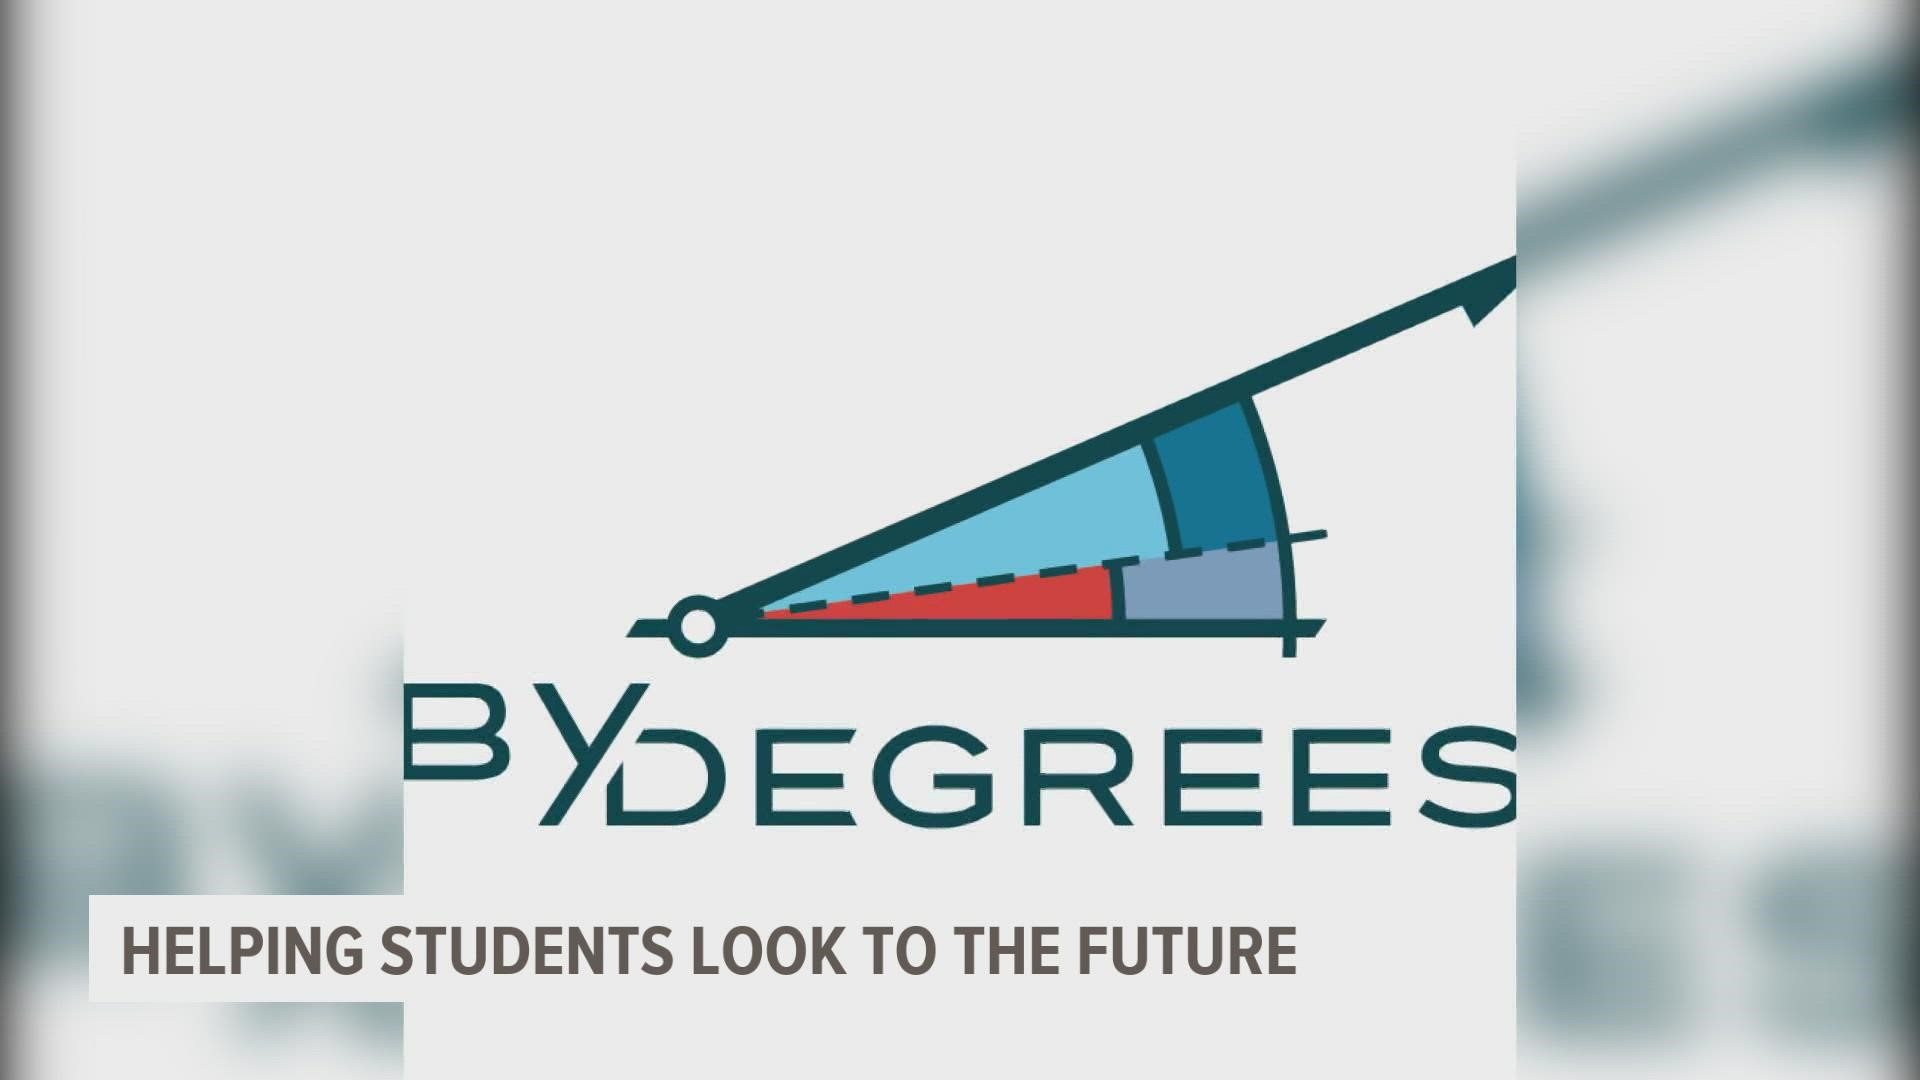 By Degrees is a non-profit organization helping students realize anything is possible after graduation, and giving them tools to help reach their goals.